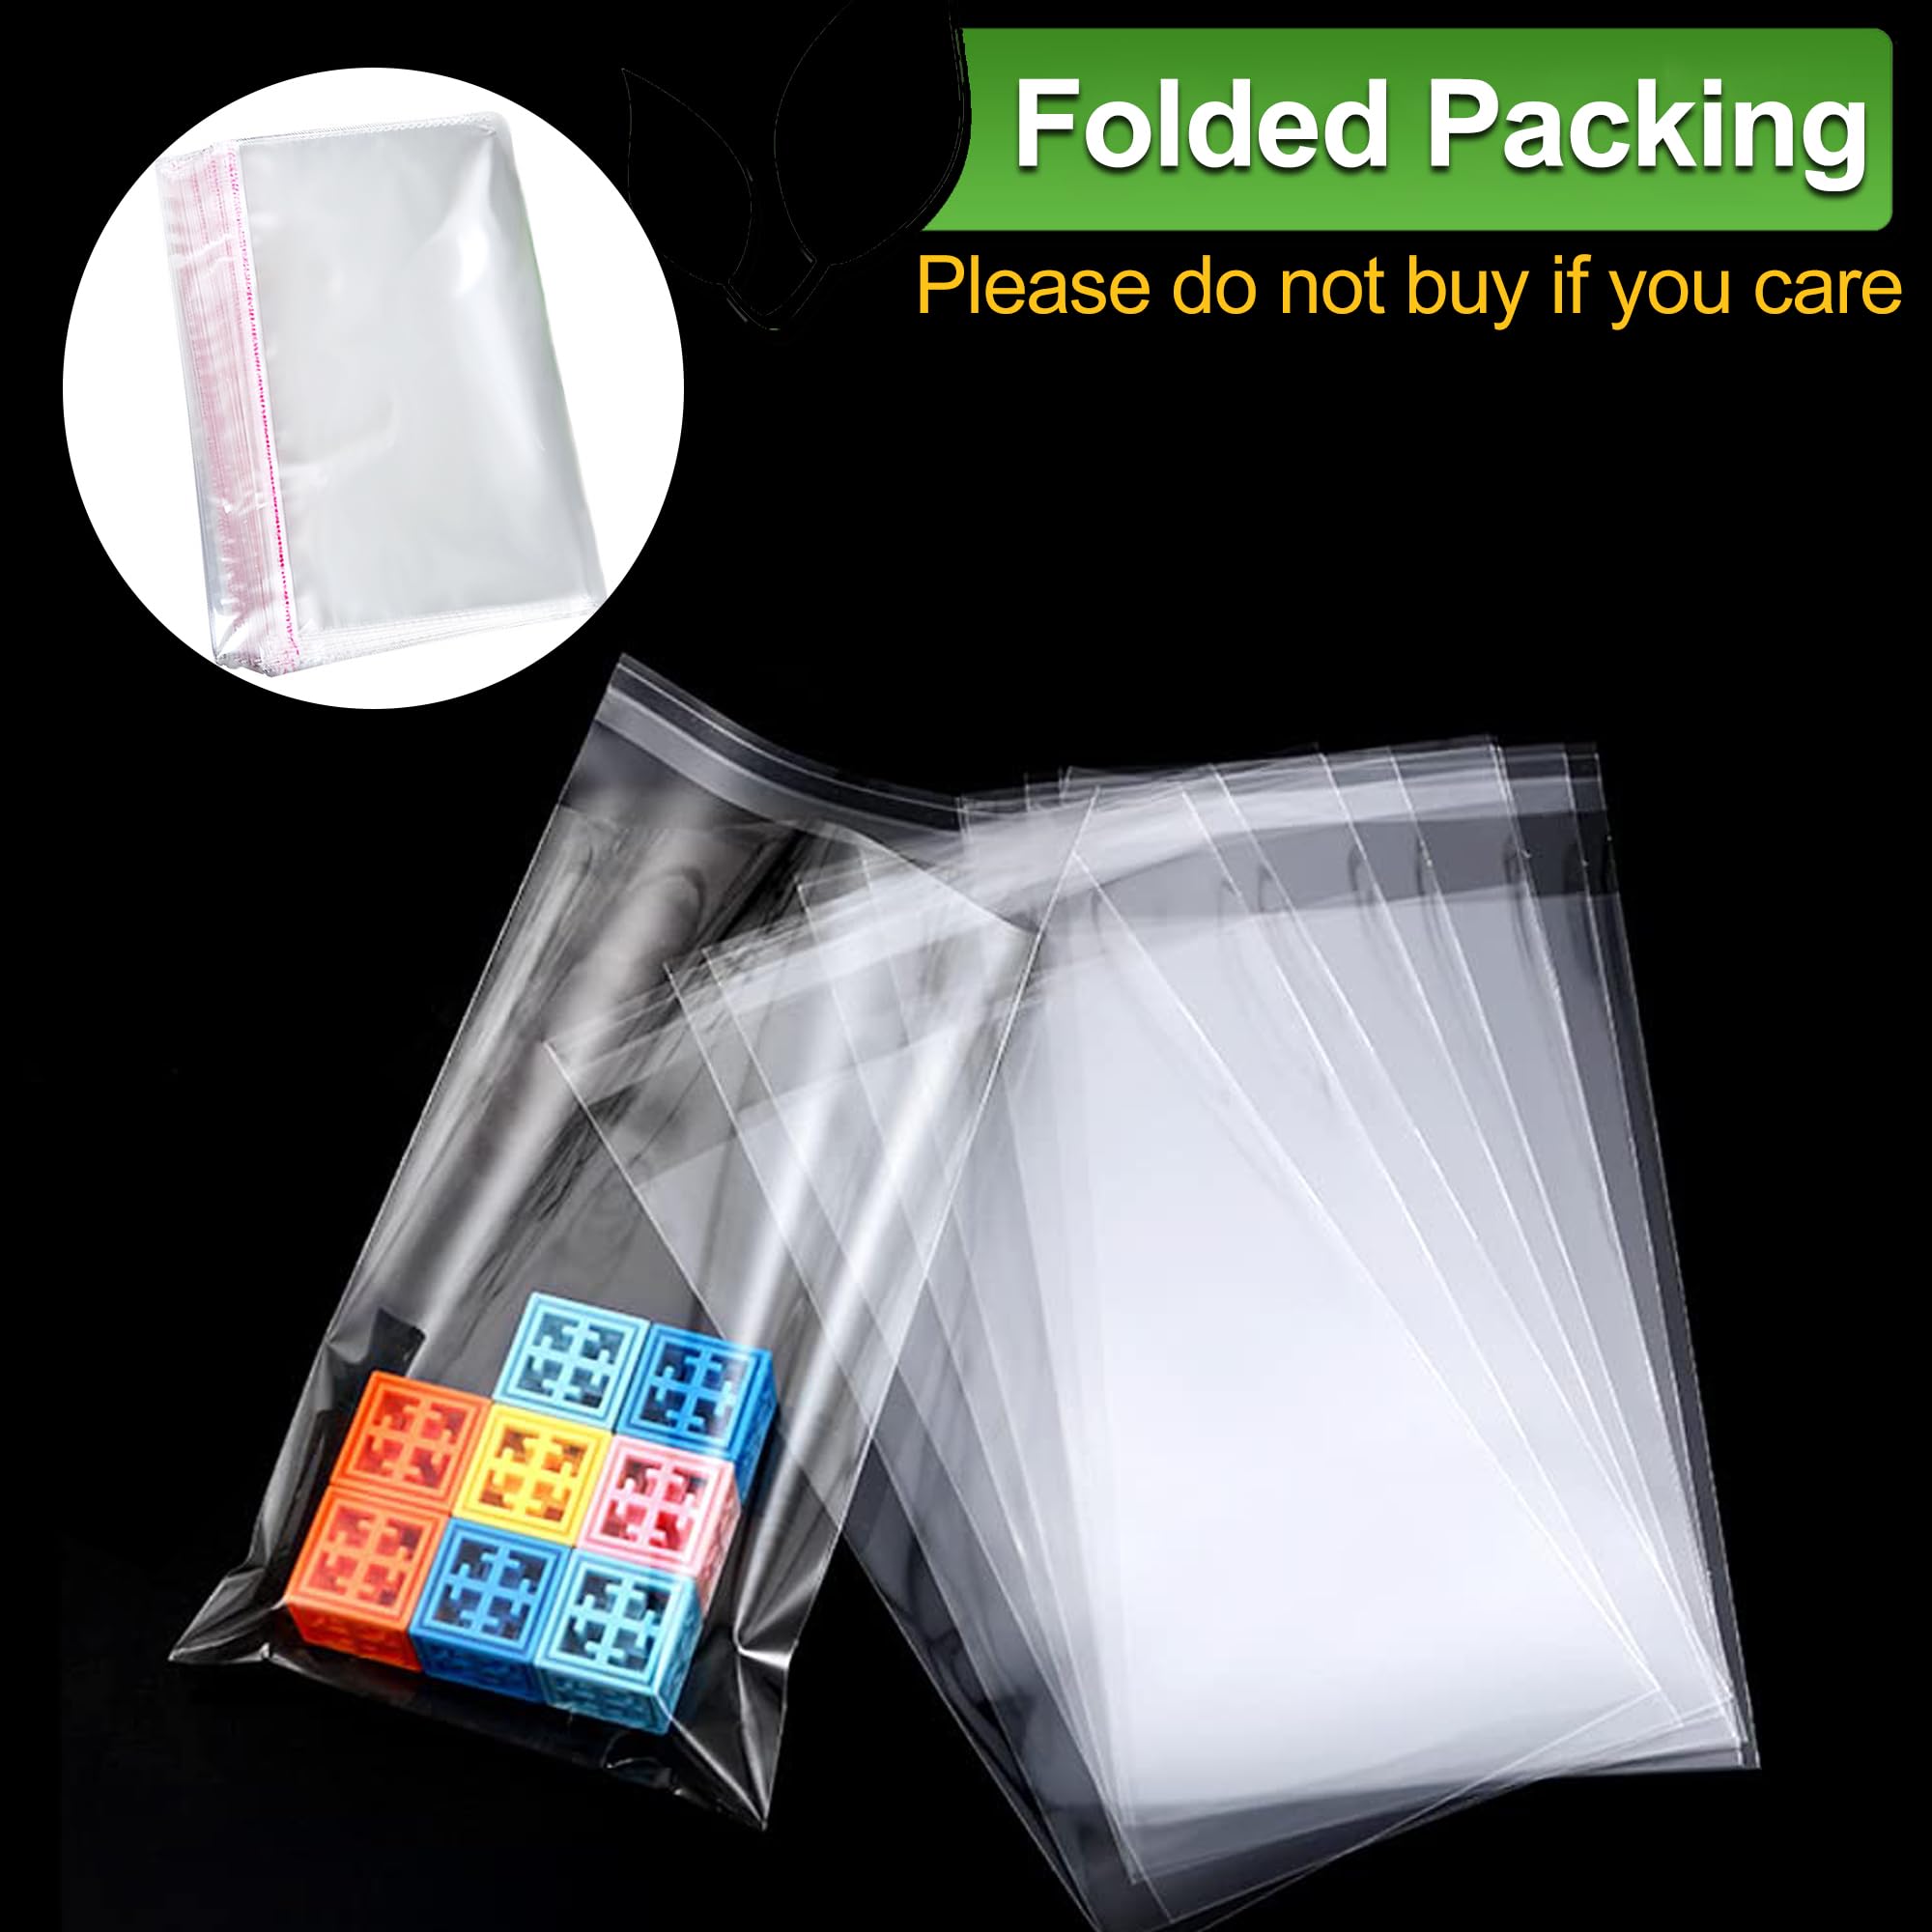 A3 Self-adhesive Clear Bags 50 Packs, Self Sealing Cellophane Display Bags/Sealable Bags, Food Safe, Cello Bags OPP for Cookies,Cards,Envelopes,Pictures (30.5 x 42cm)